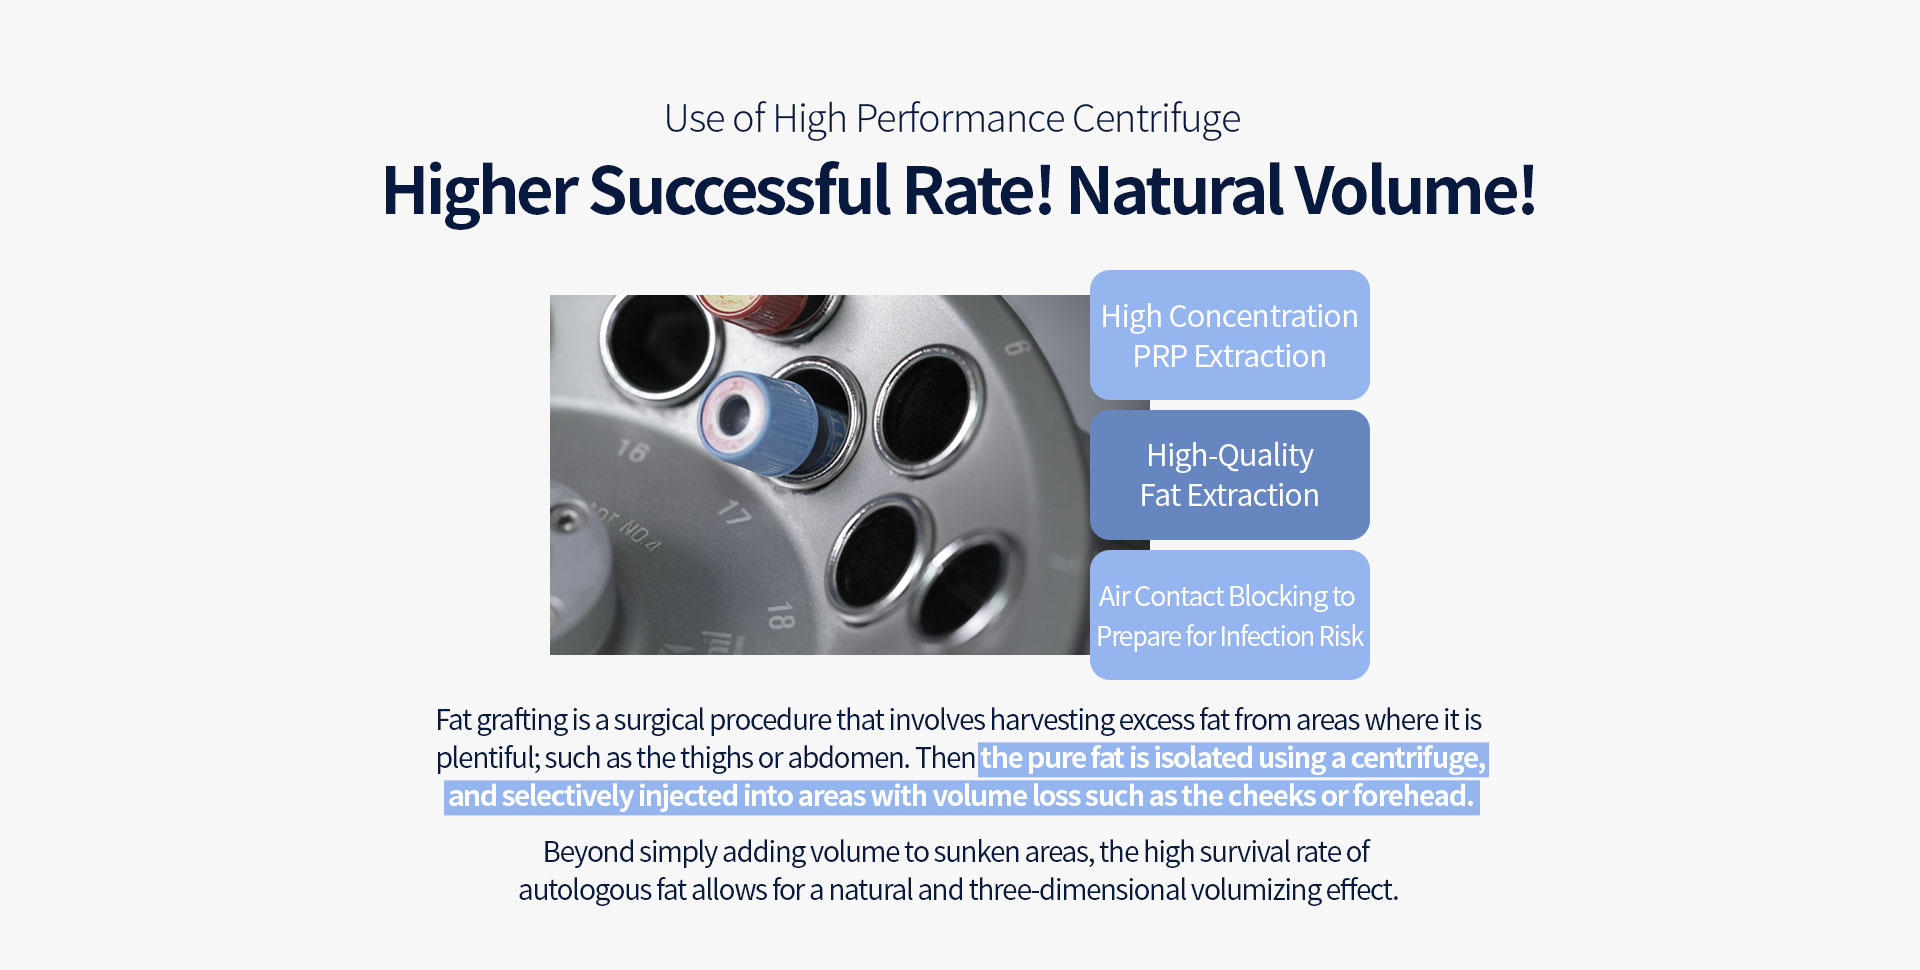 Use of High Performance Centrifuge Higher Successful Rate! Natural Volume!